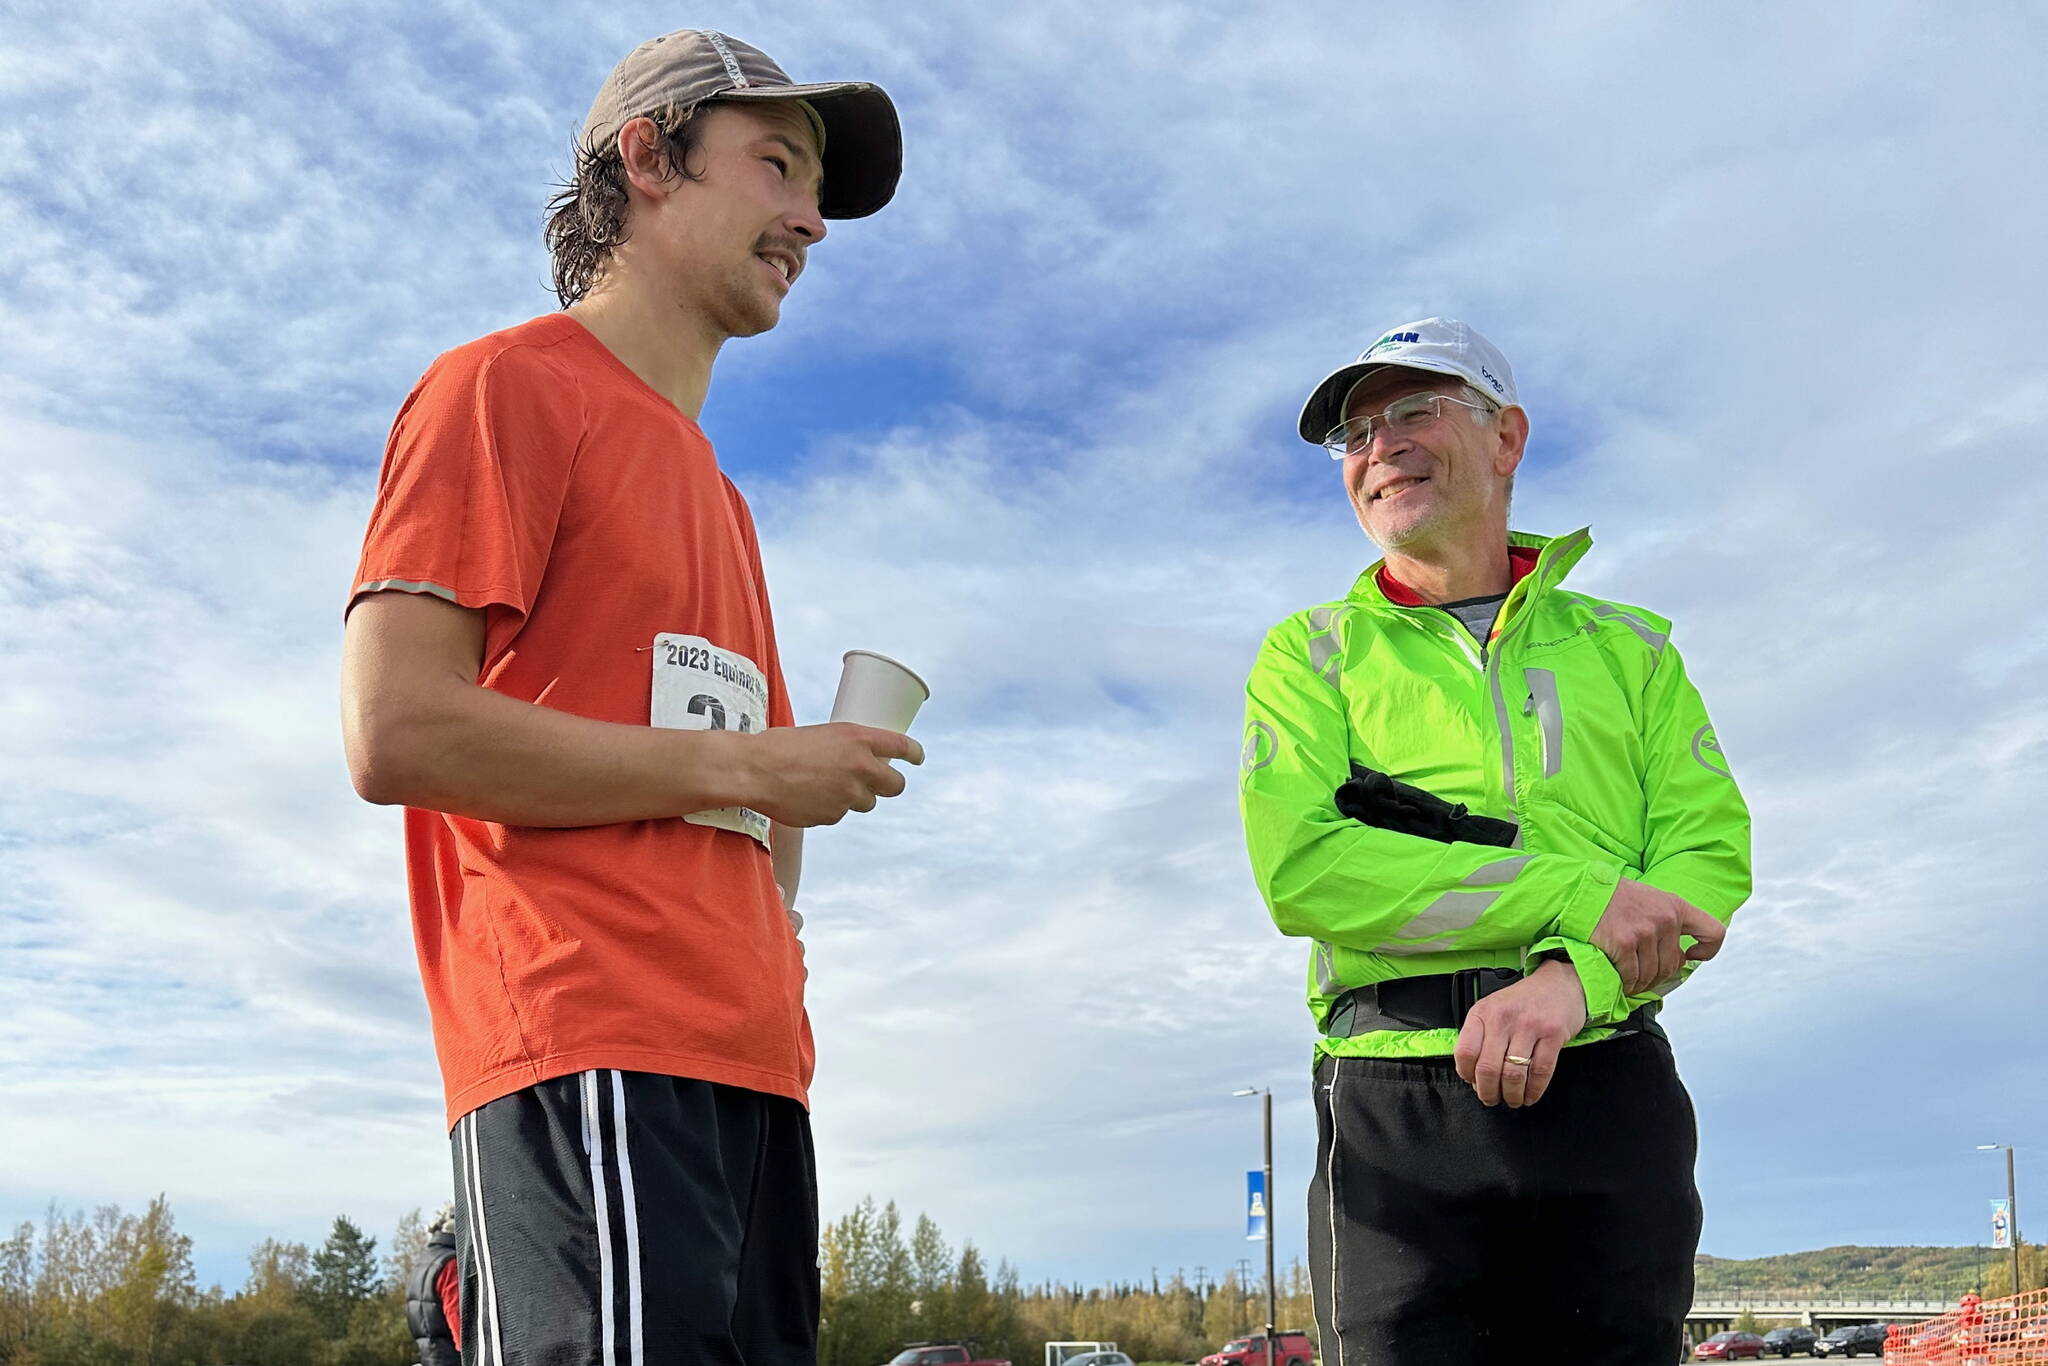 Zack Bursell, left, stands with father John, right, after winning the Equinox Marathon in Fairbanks, Saturday, Sept. 16. (Photo courtesy Jamie Bursell)